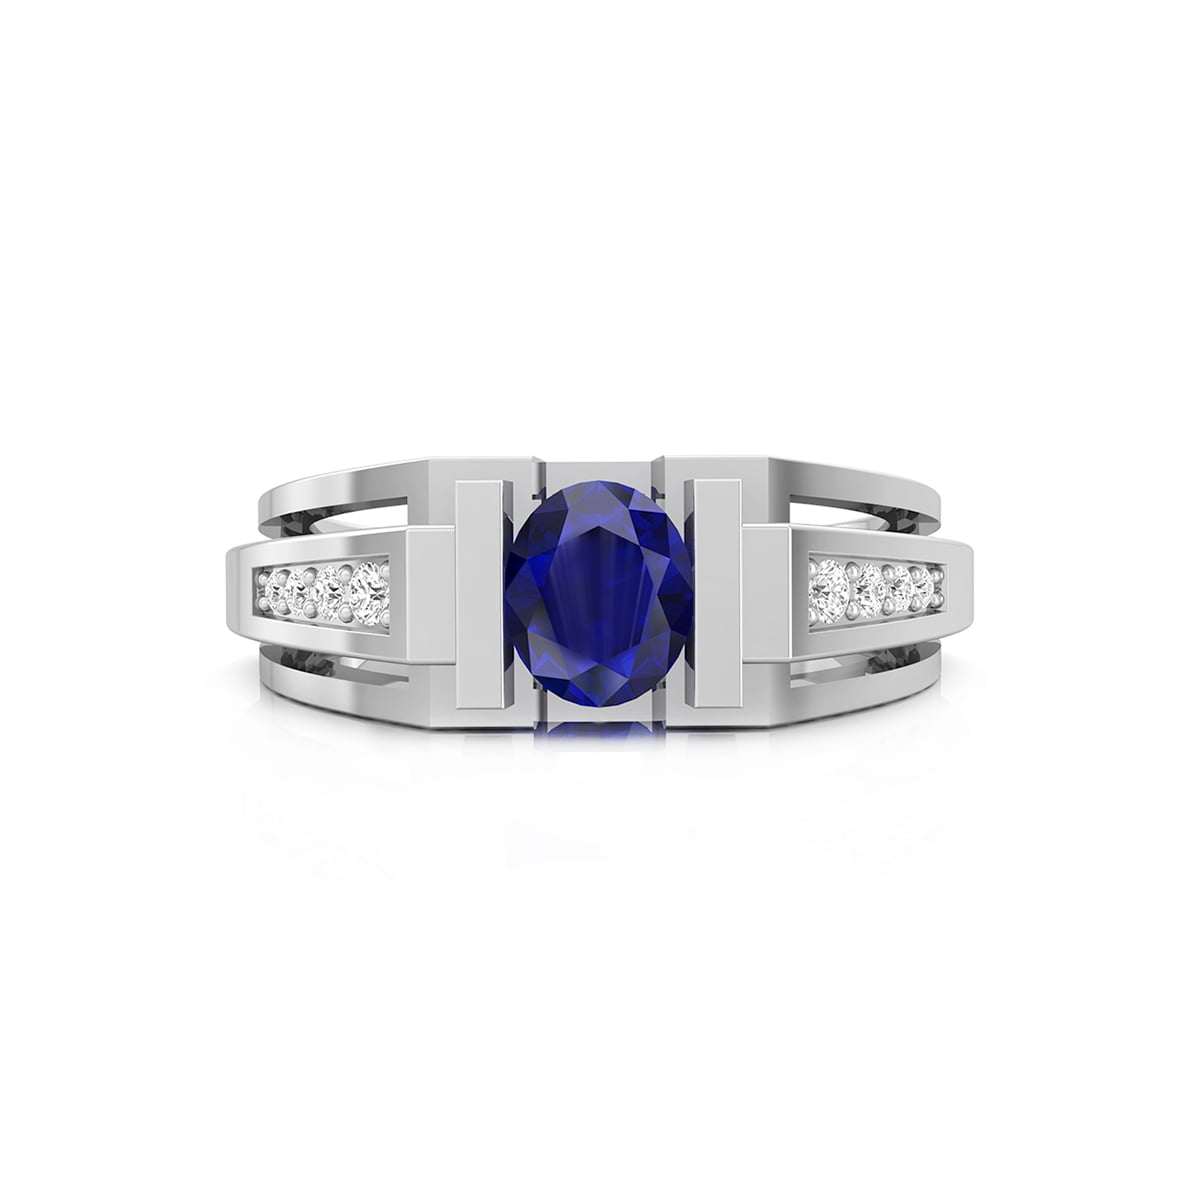 Tension Set Blue Sapphire Oval With CZ Round Stone Men's Ring Father's Day Gift